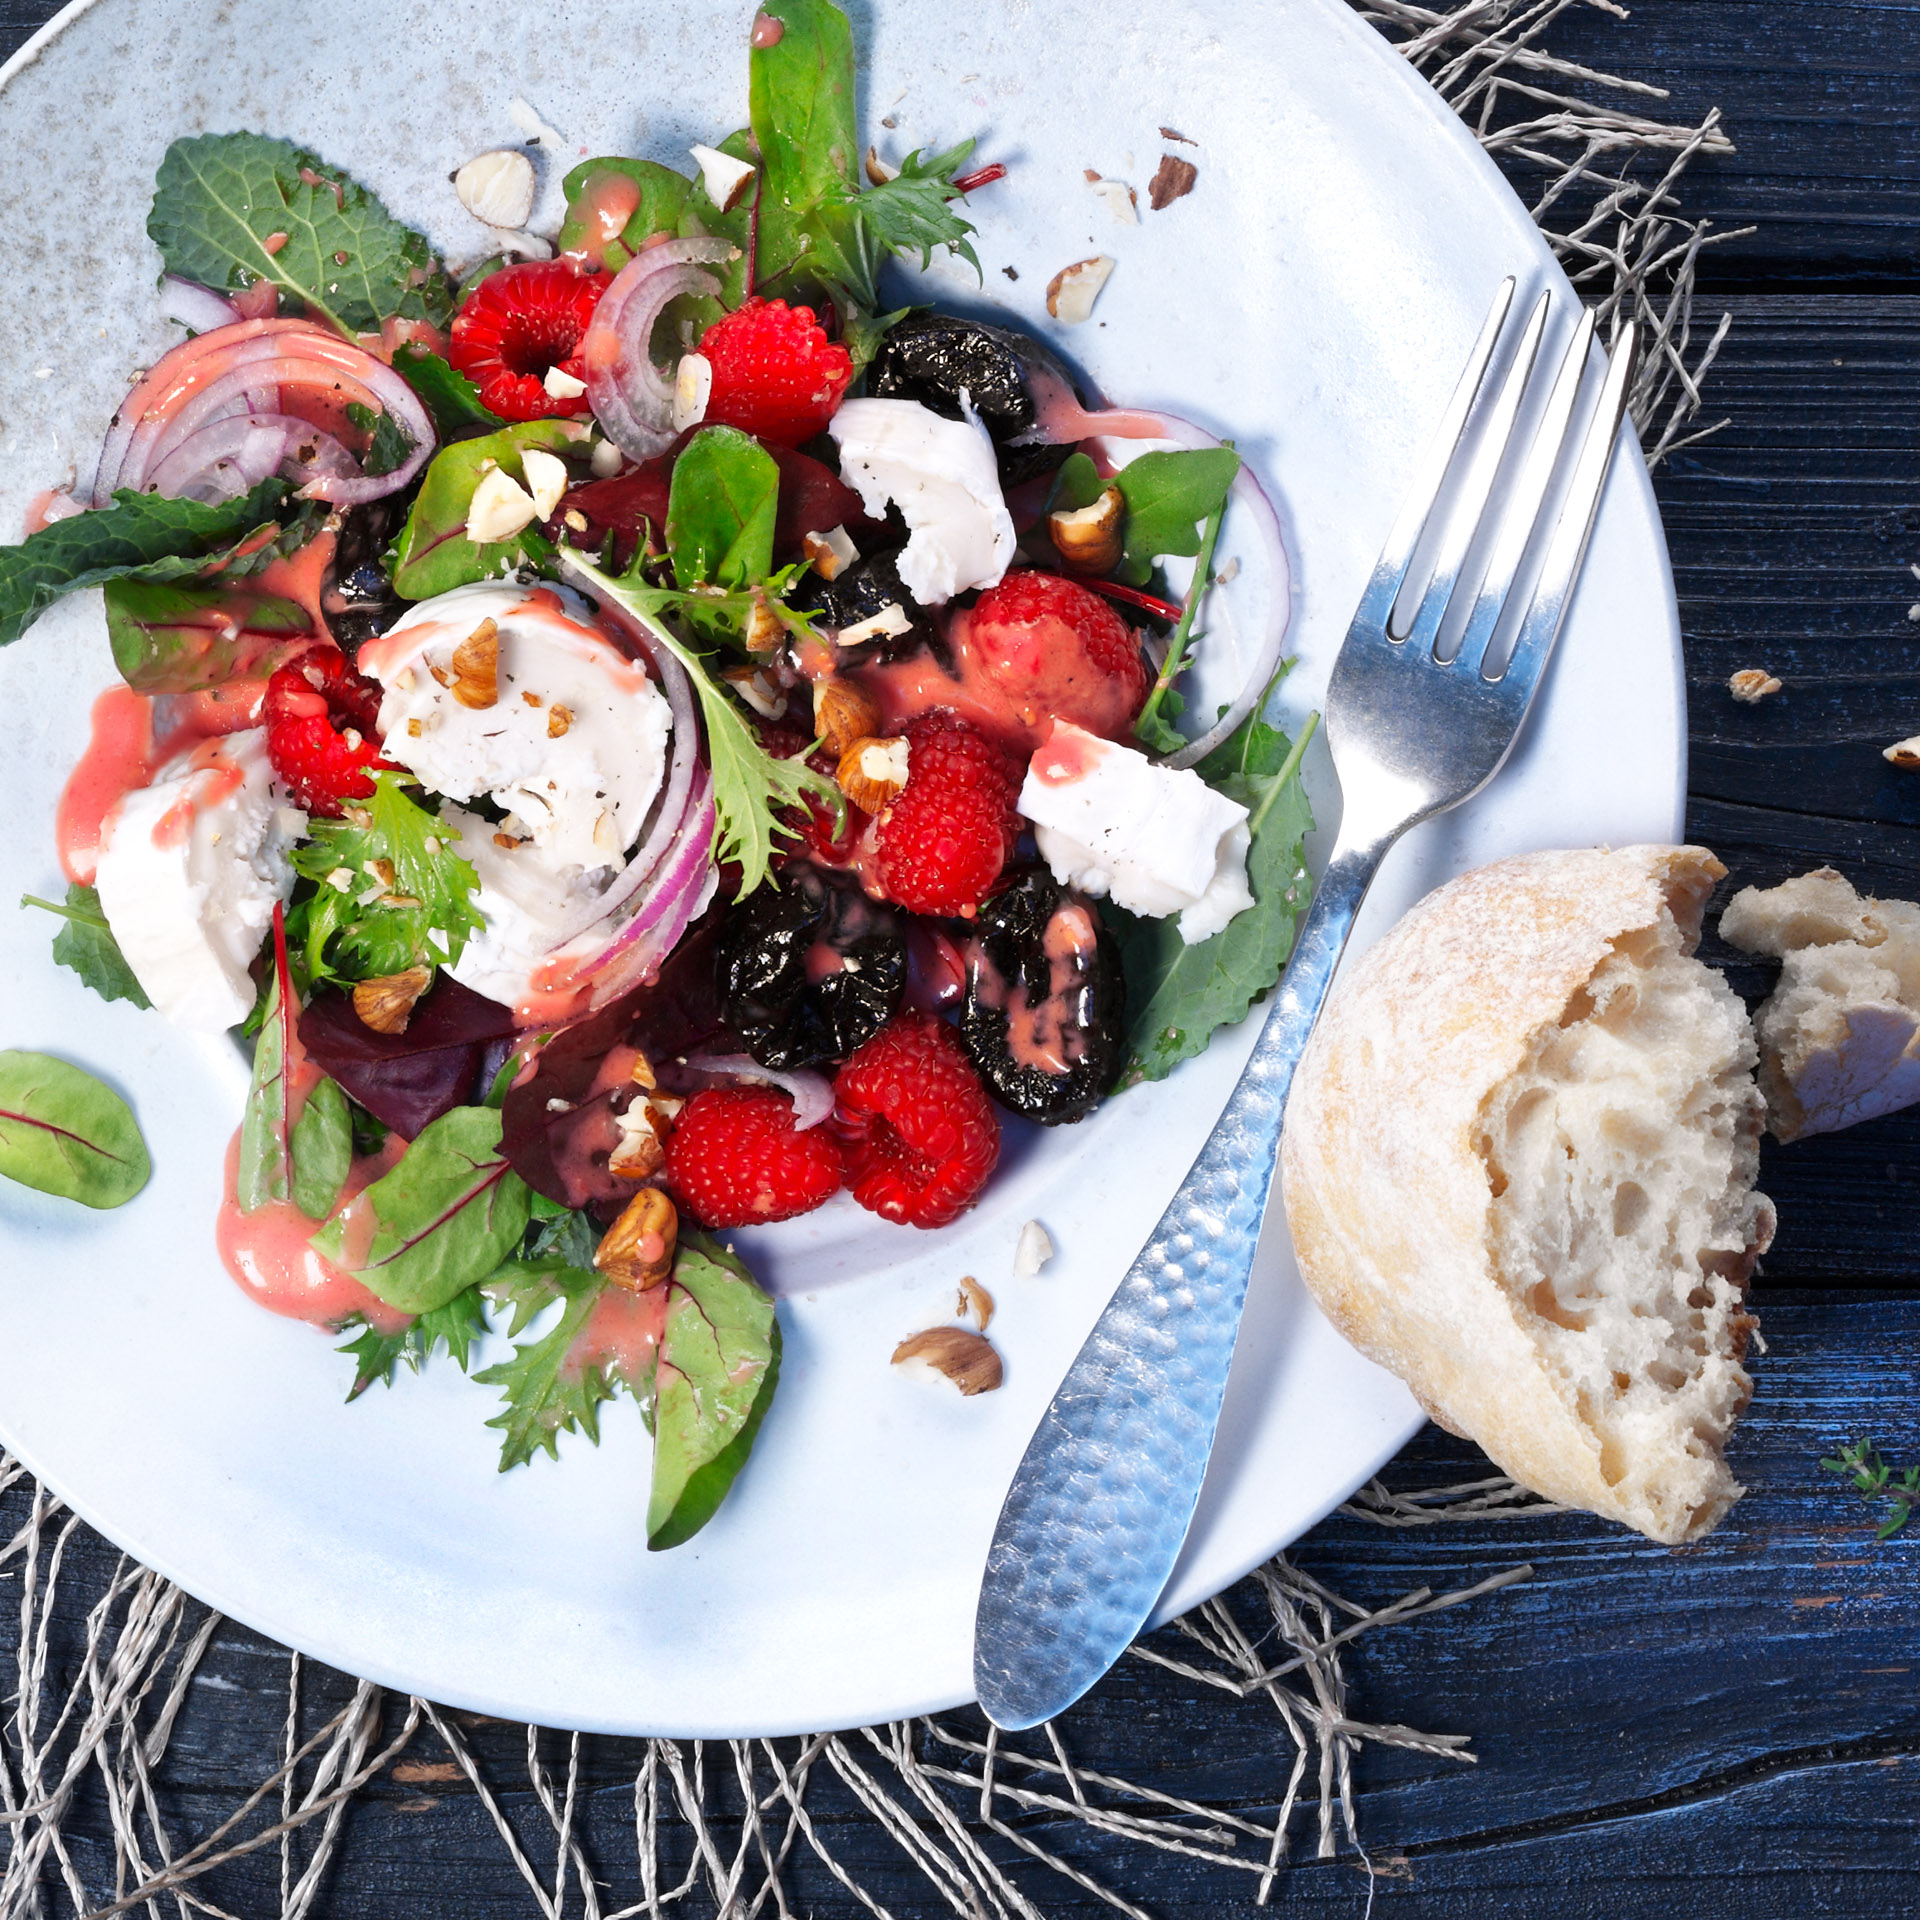 Prunes and goat cheese are a classic pairing any time of the year. Make this salad in the winter by substituting roasted, diced beets in place of the raspberries.